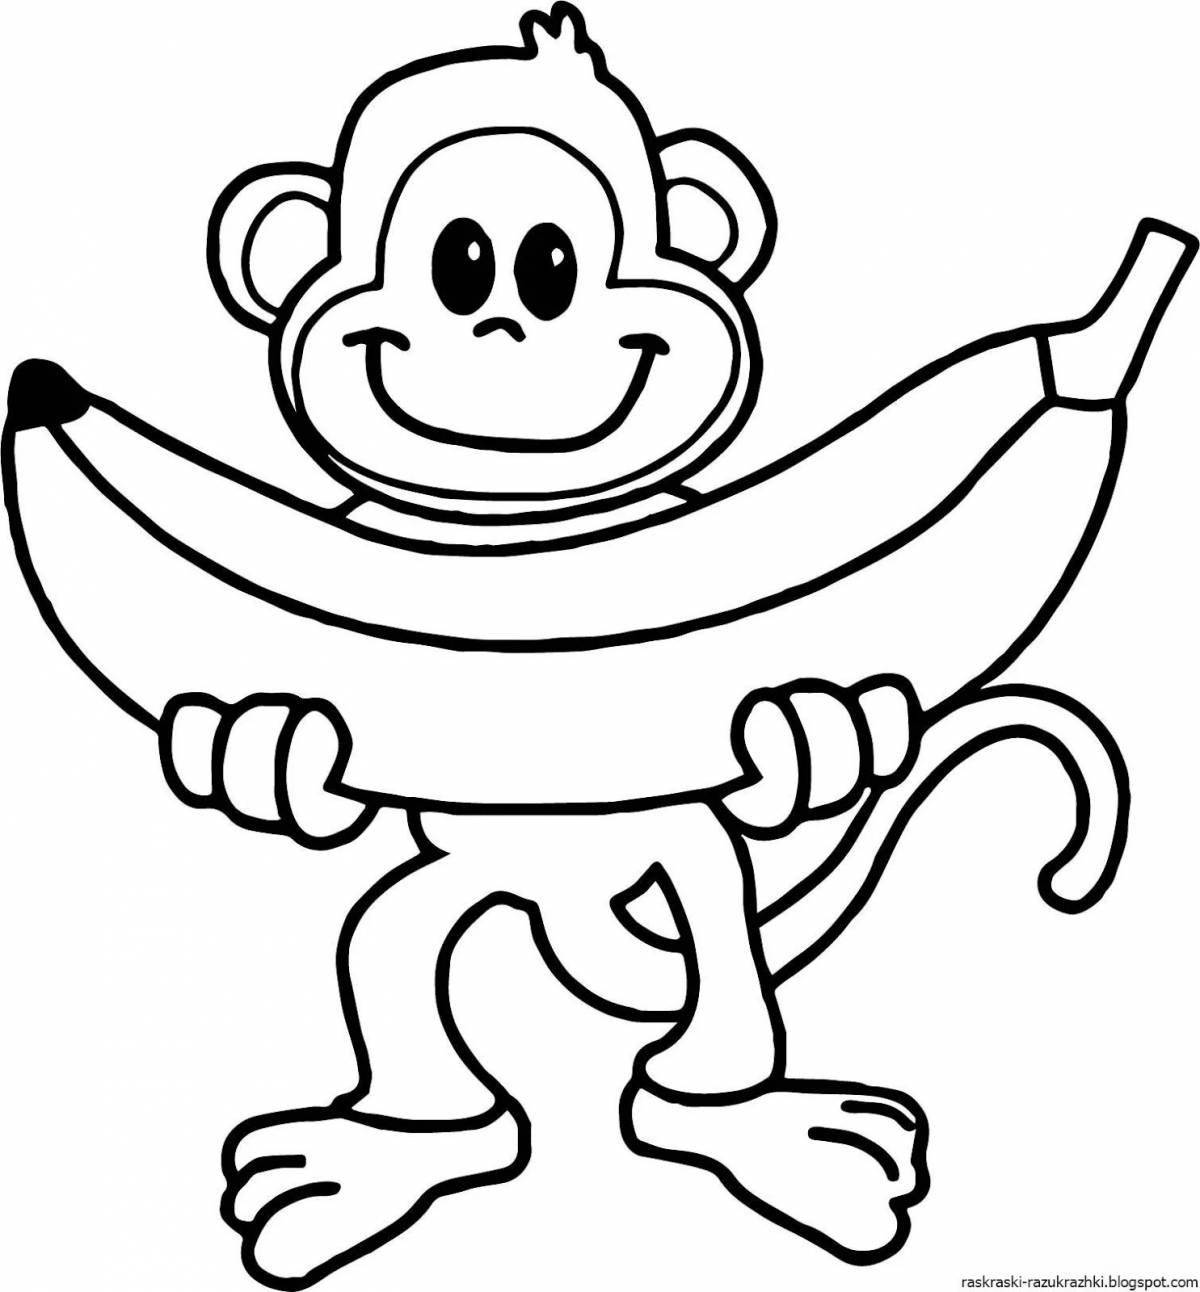 Amazing chimpanzee coloring pages for kids